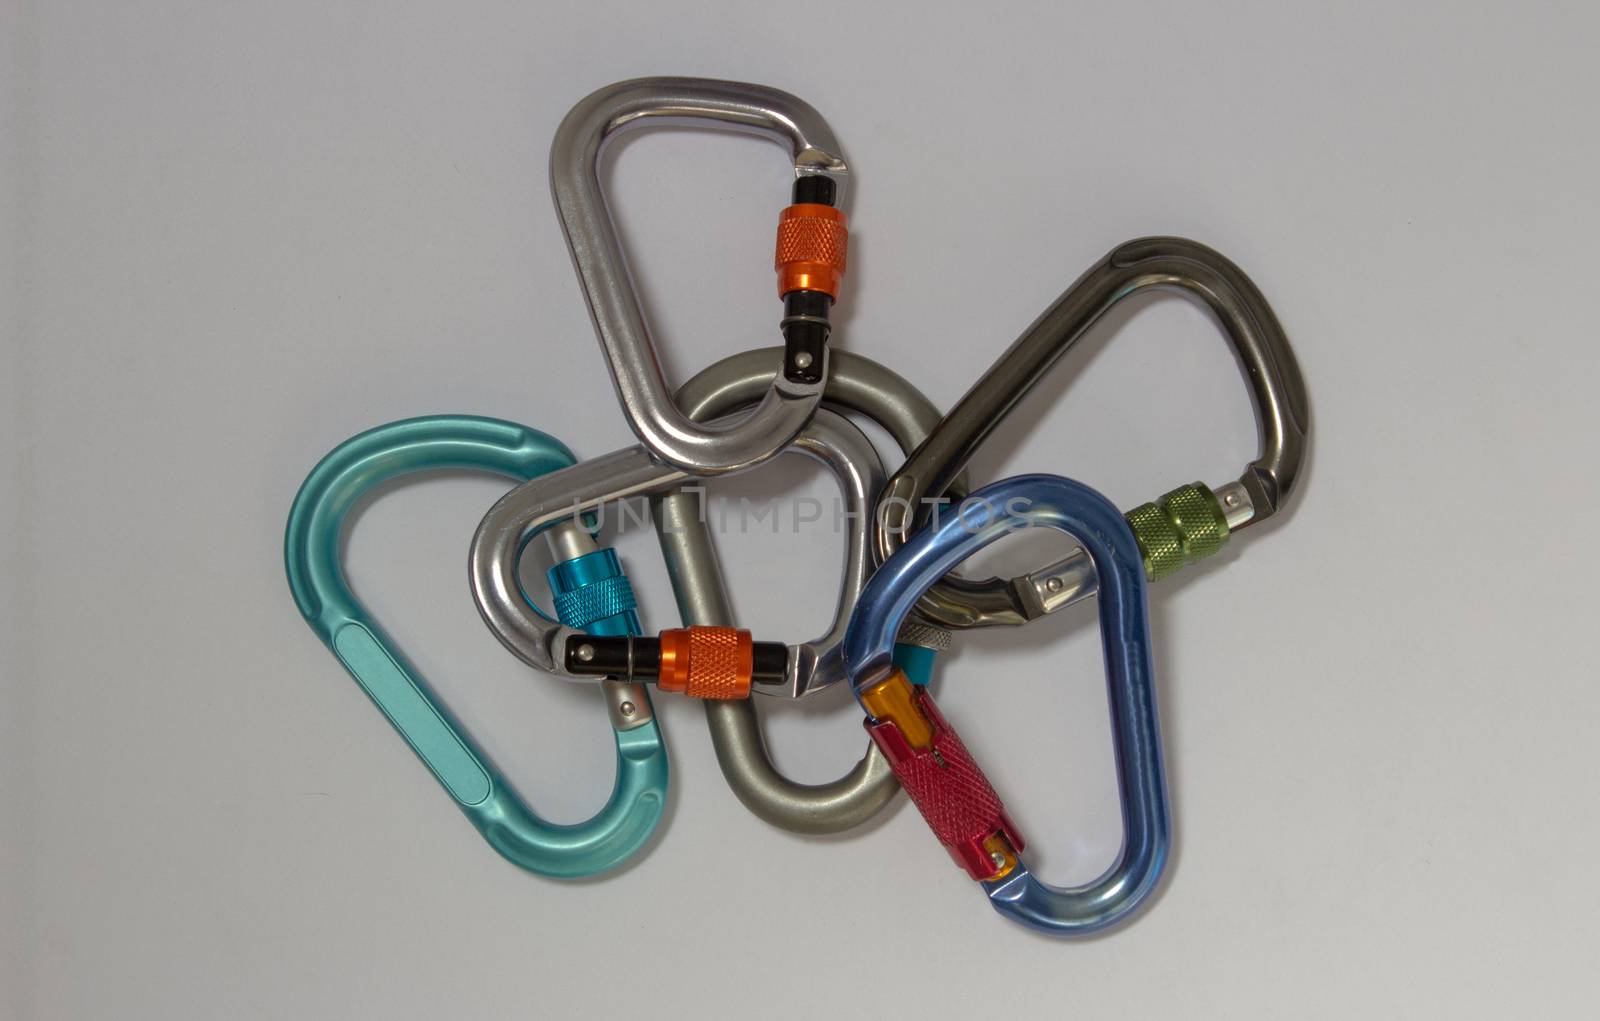 A bunch of carabiners, some screw gate and pear shaped, another automatic locking or D shaped